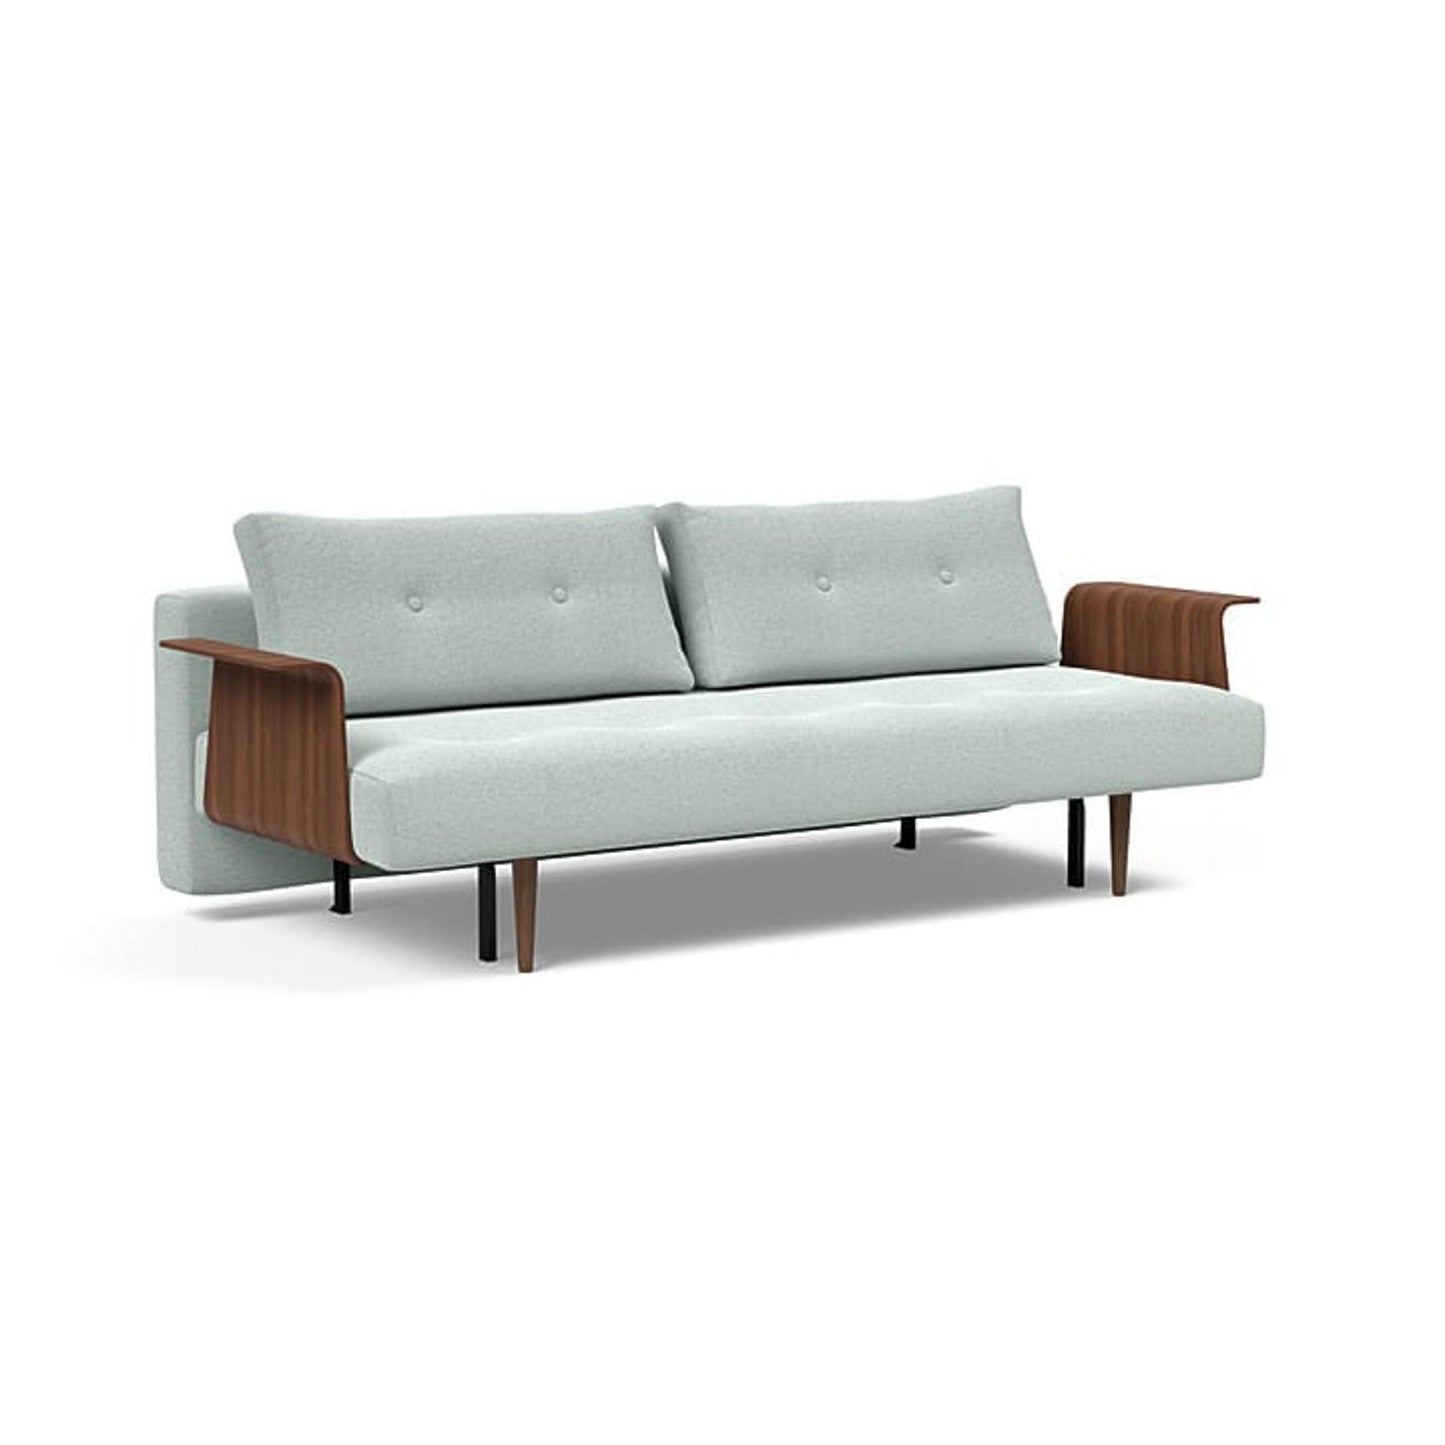 Recast Plus Sofa Bed w/Walnut Arms in Soft Pacific Pearl